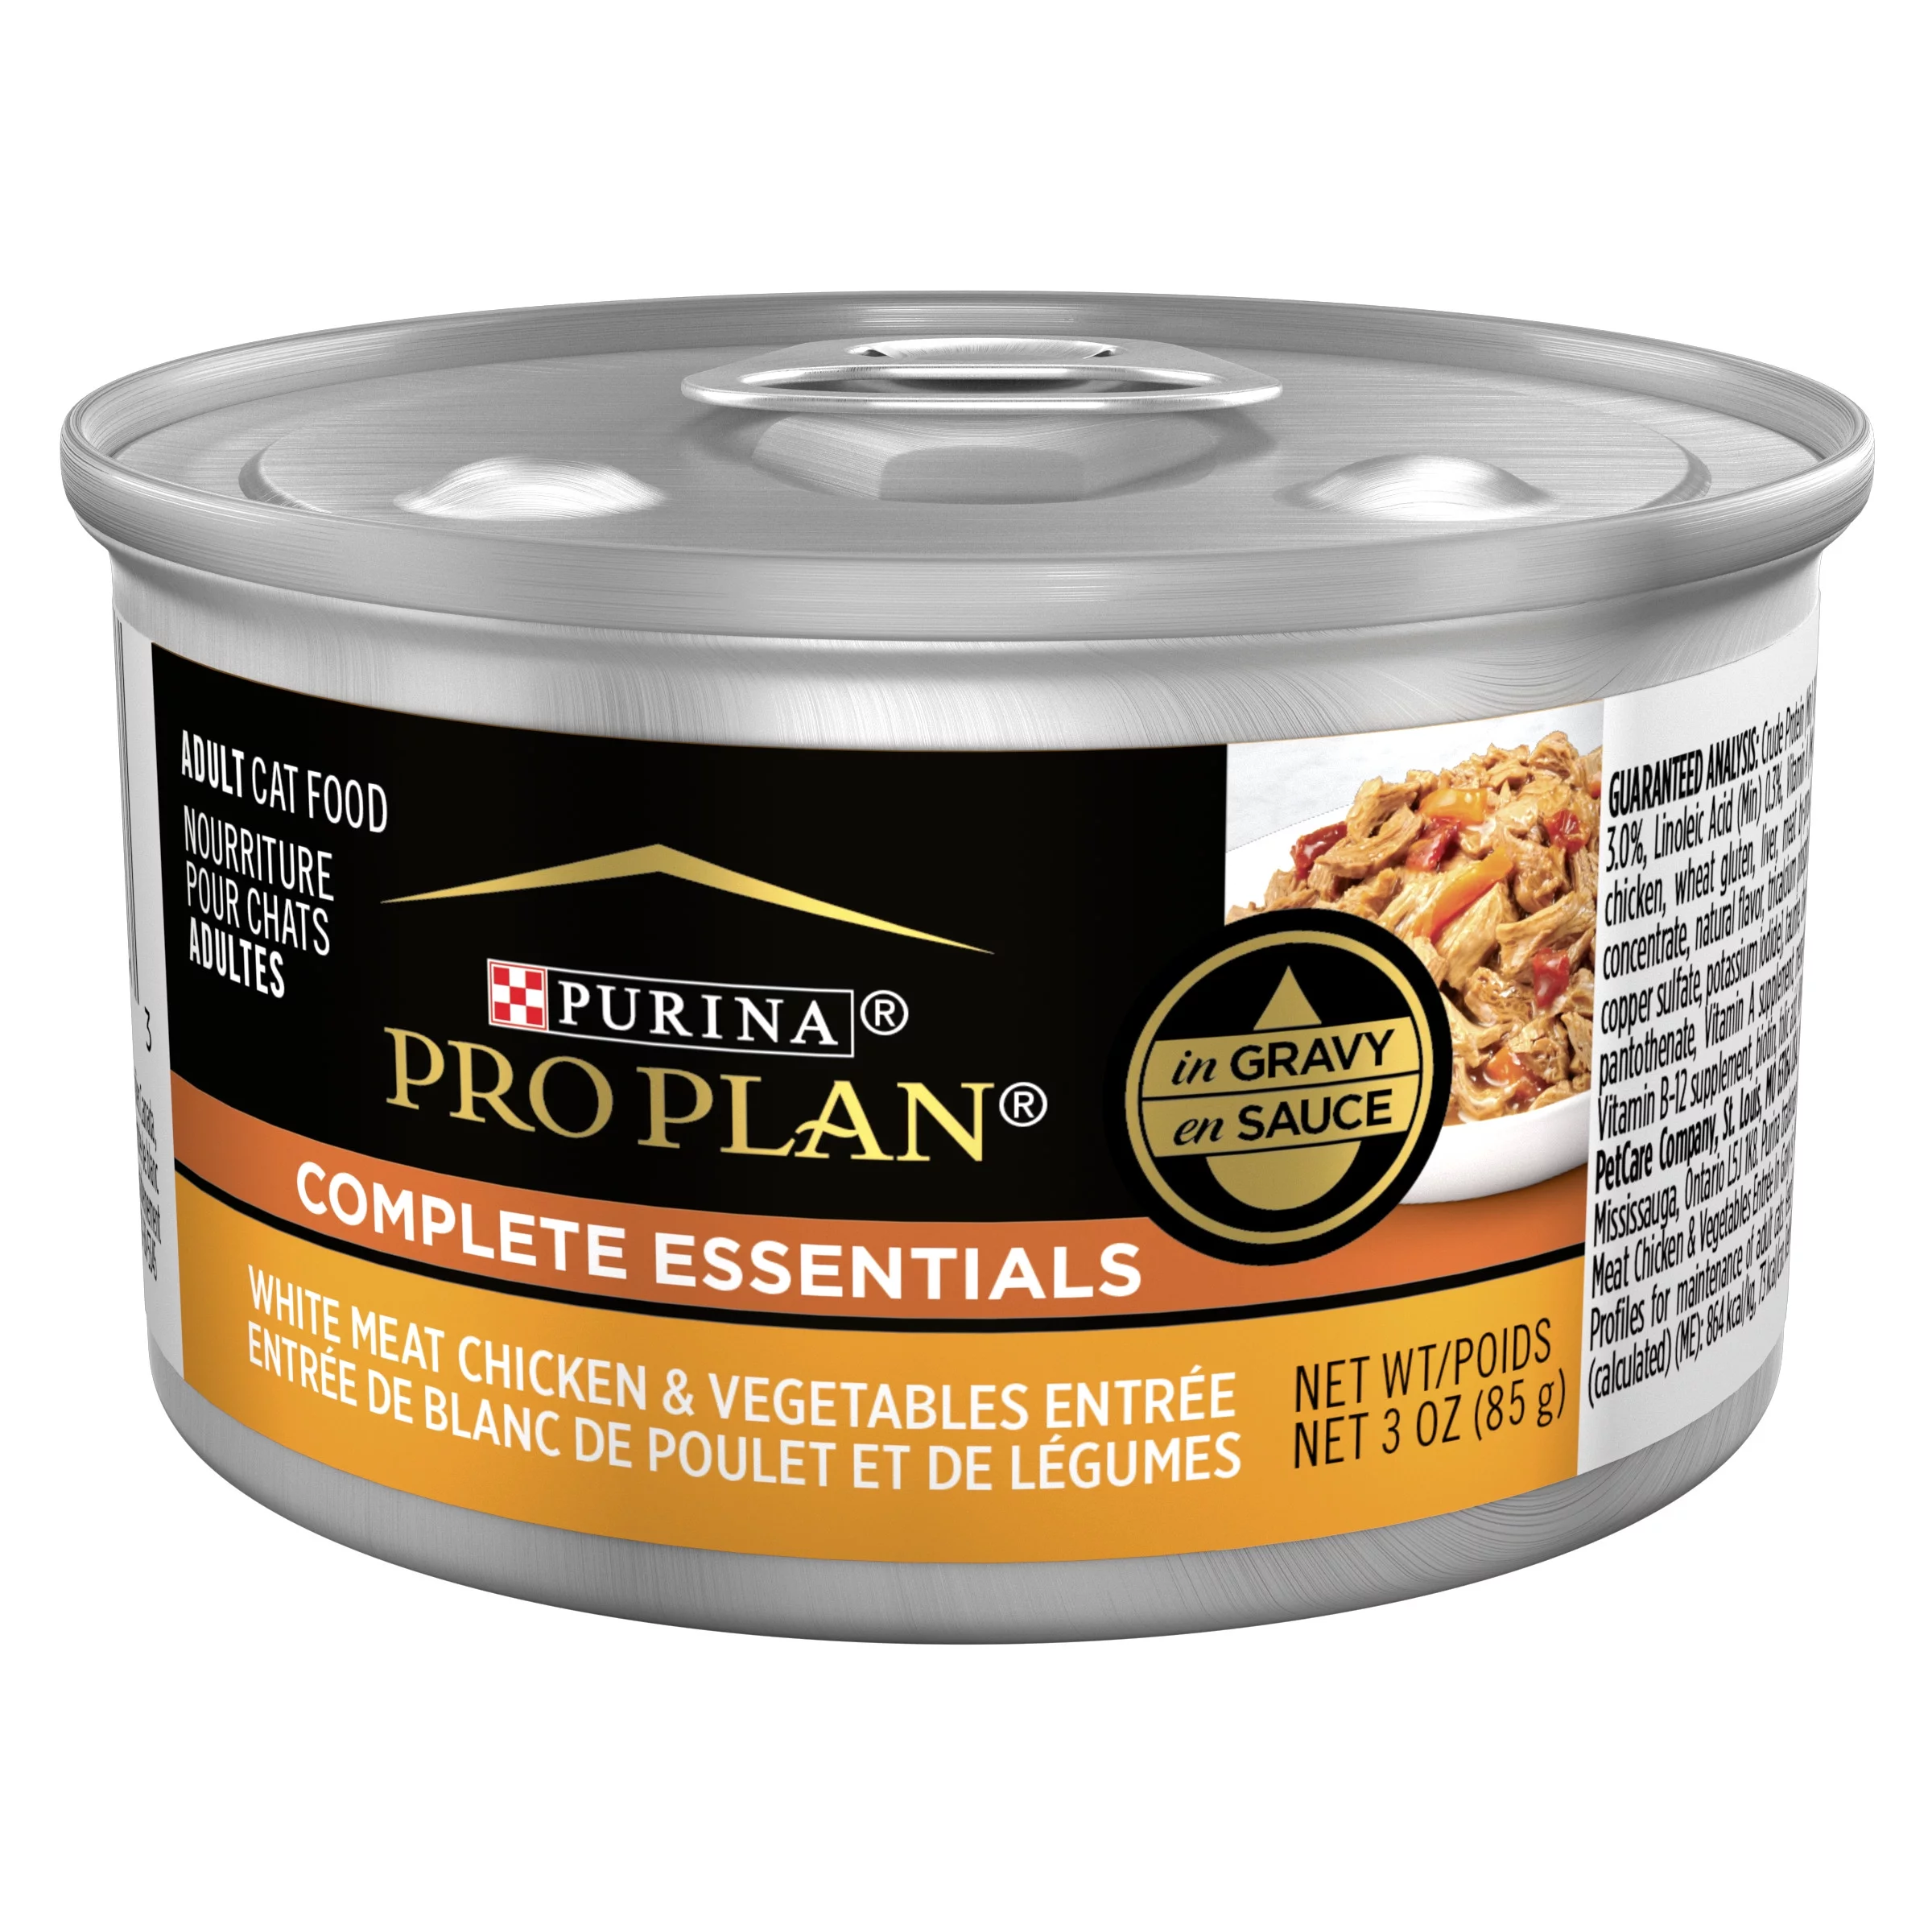 Purina Pro Plan Complete Essentials Wet Cat Food Chicken Vegetables, 3 oz Cans (24 Pack)